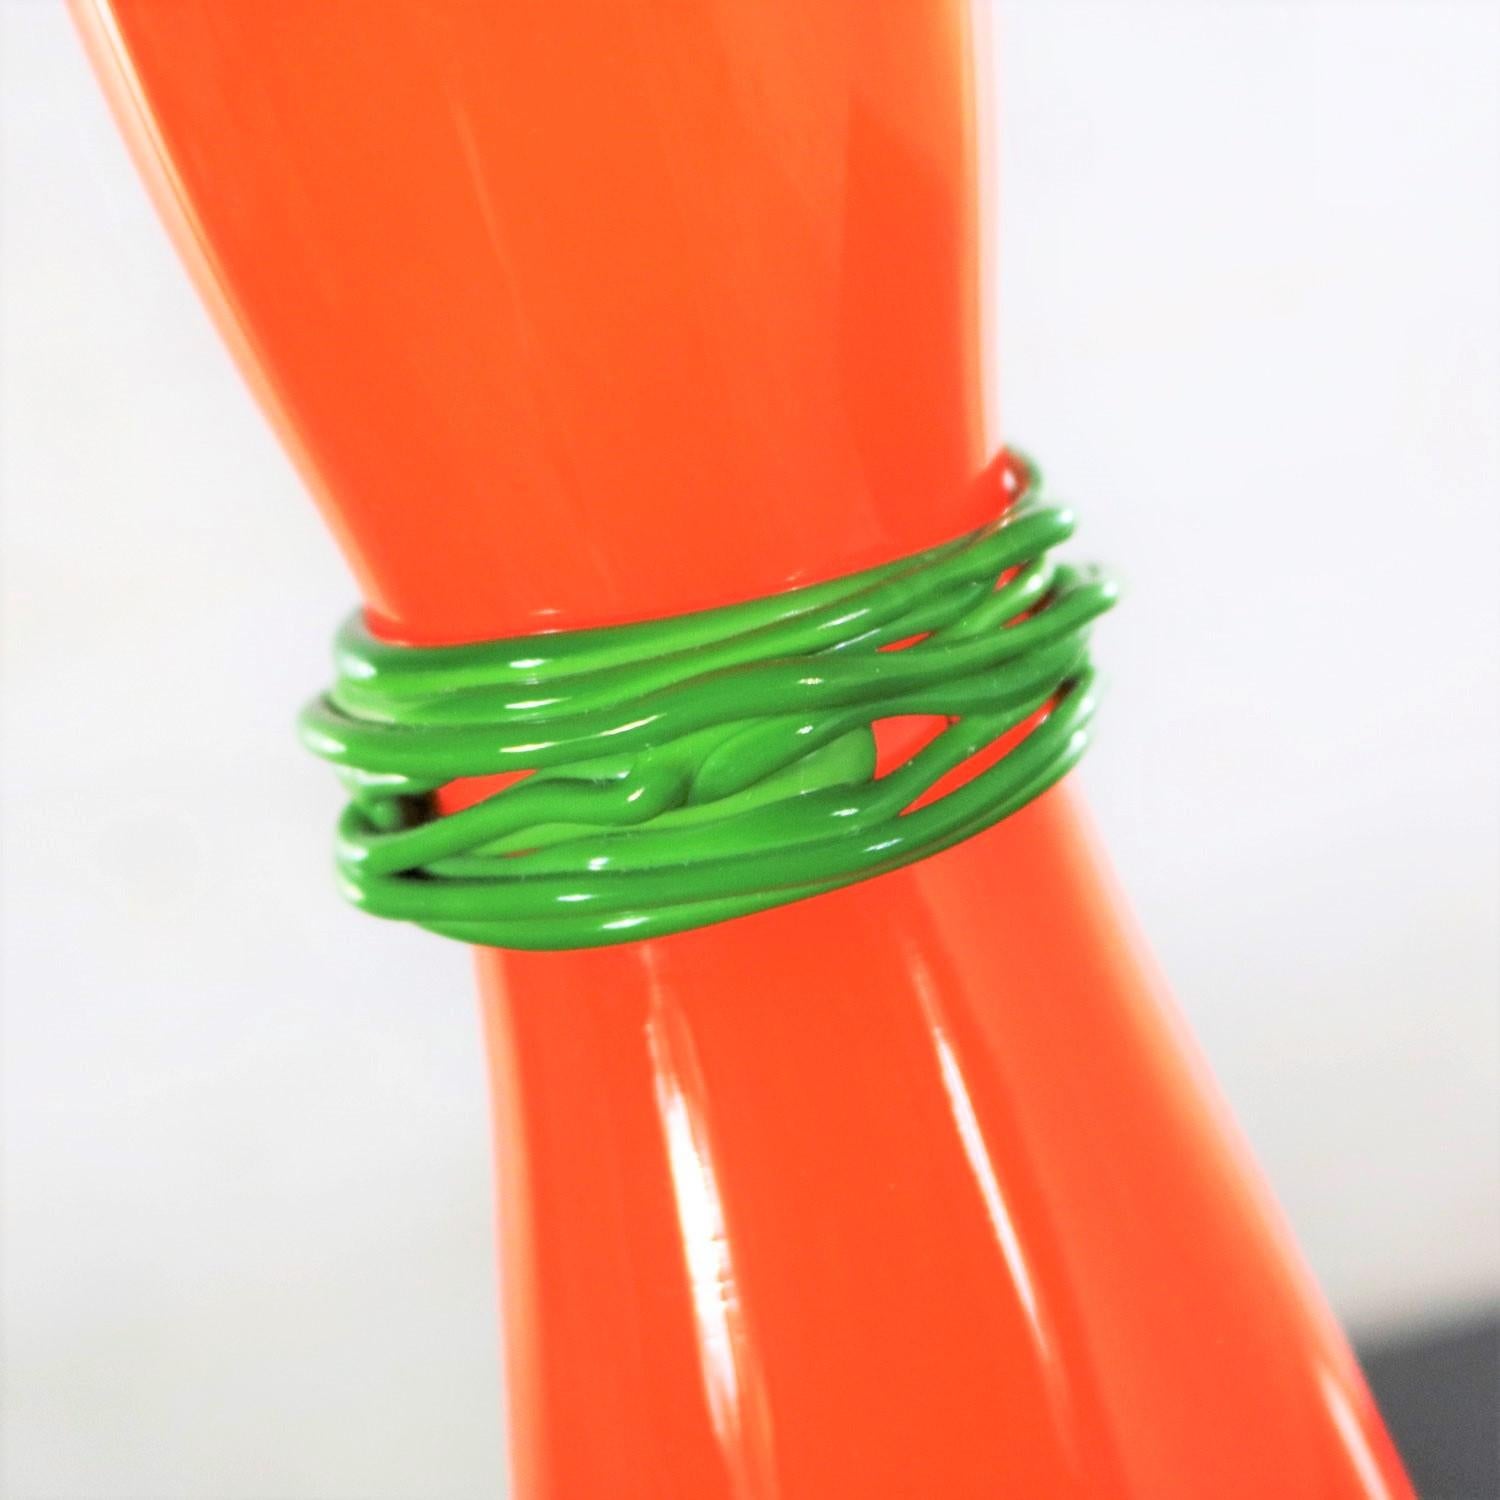 Art Glass Czech Bohemian Hourglass Glass Vase by Rony Plesl in Orange and Green Signed